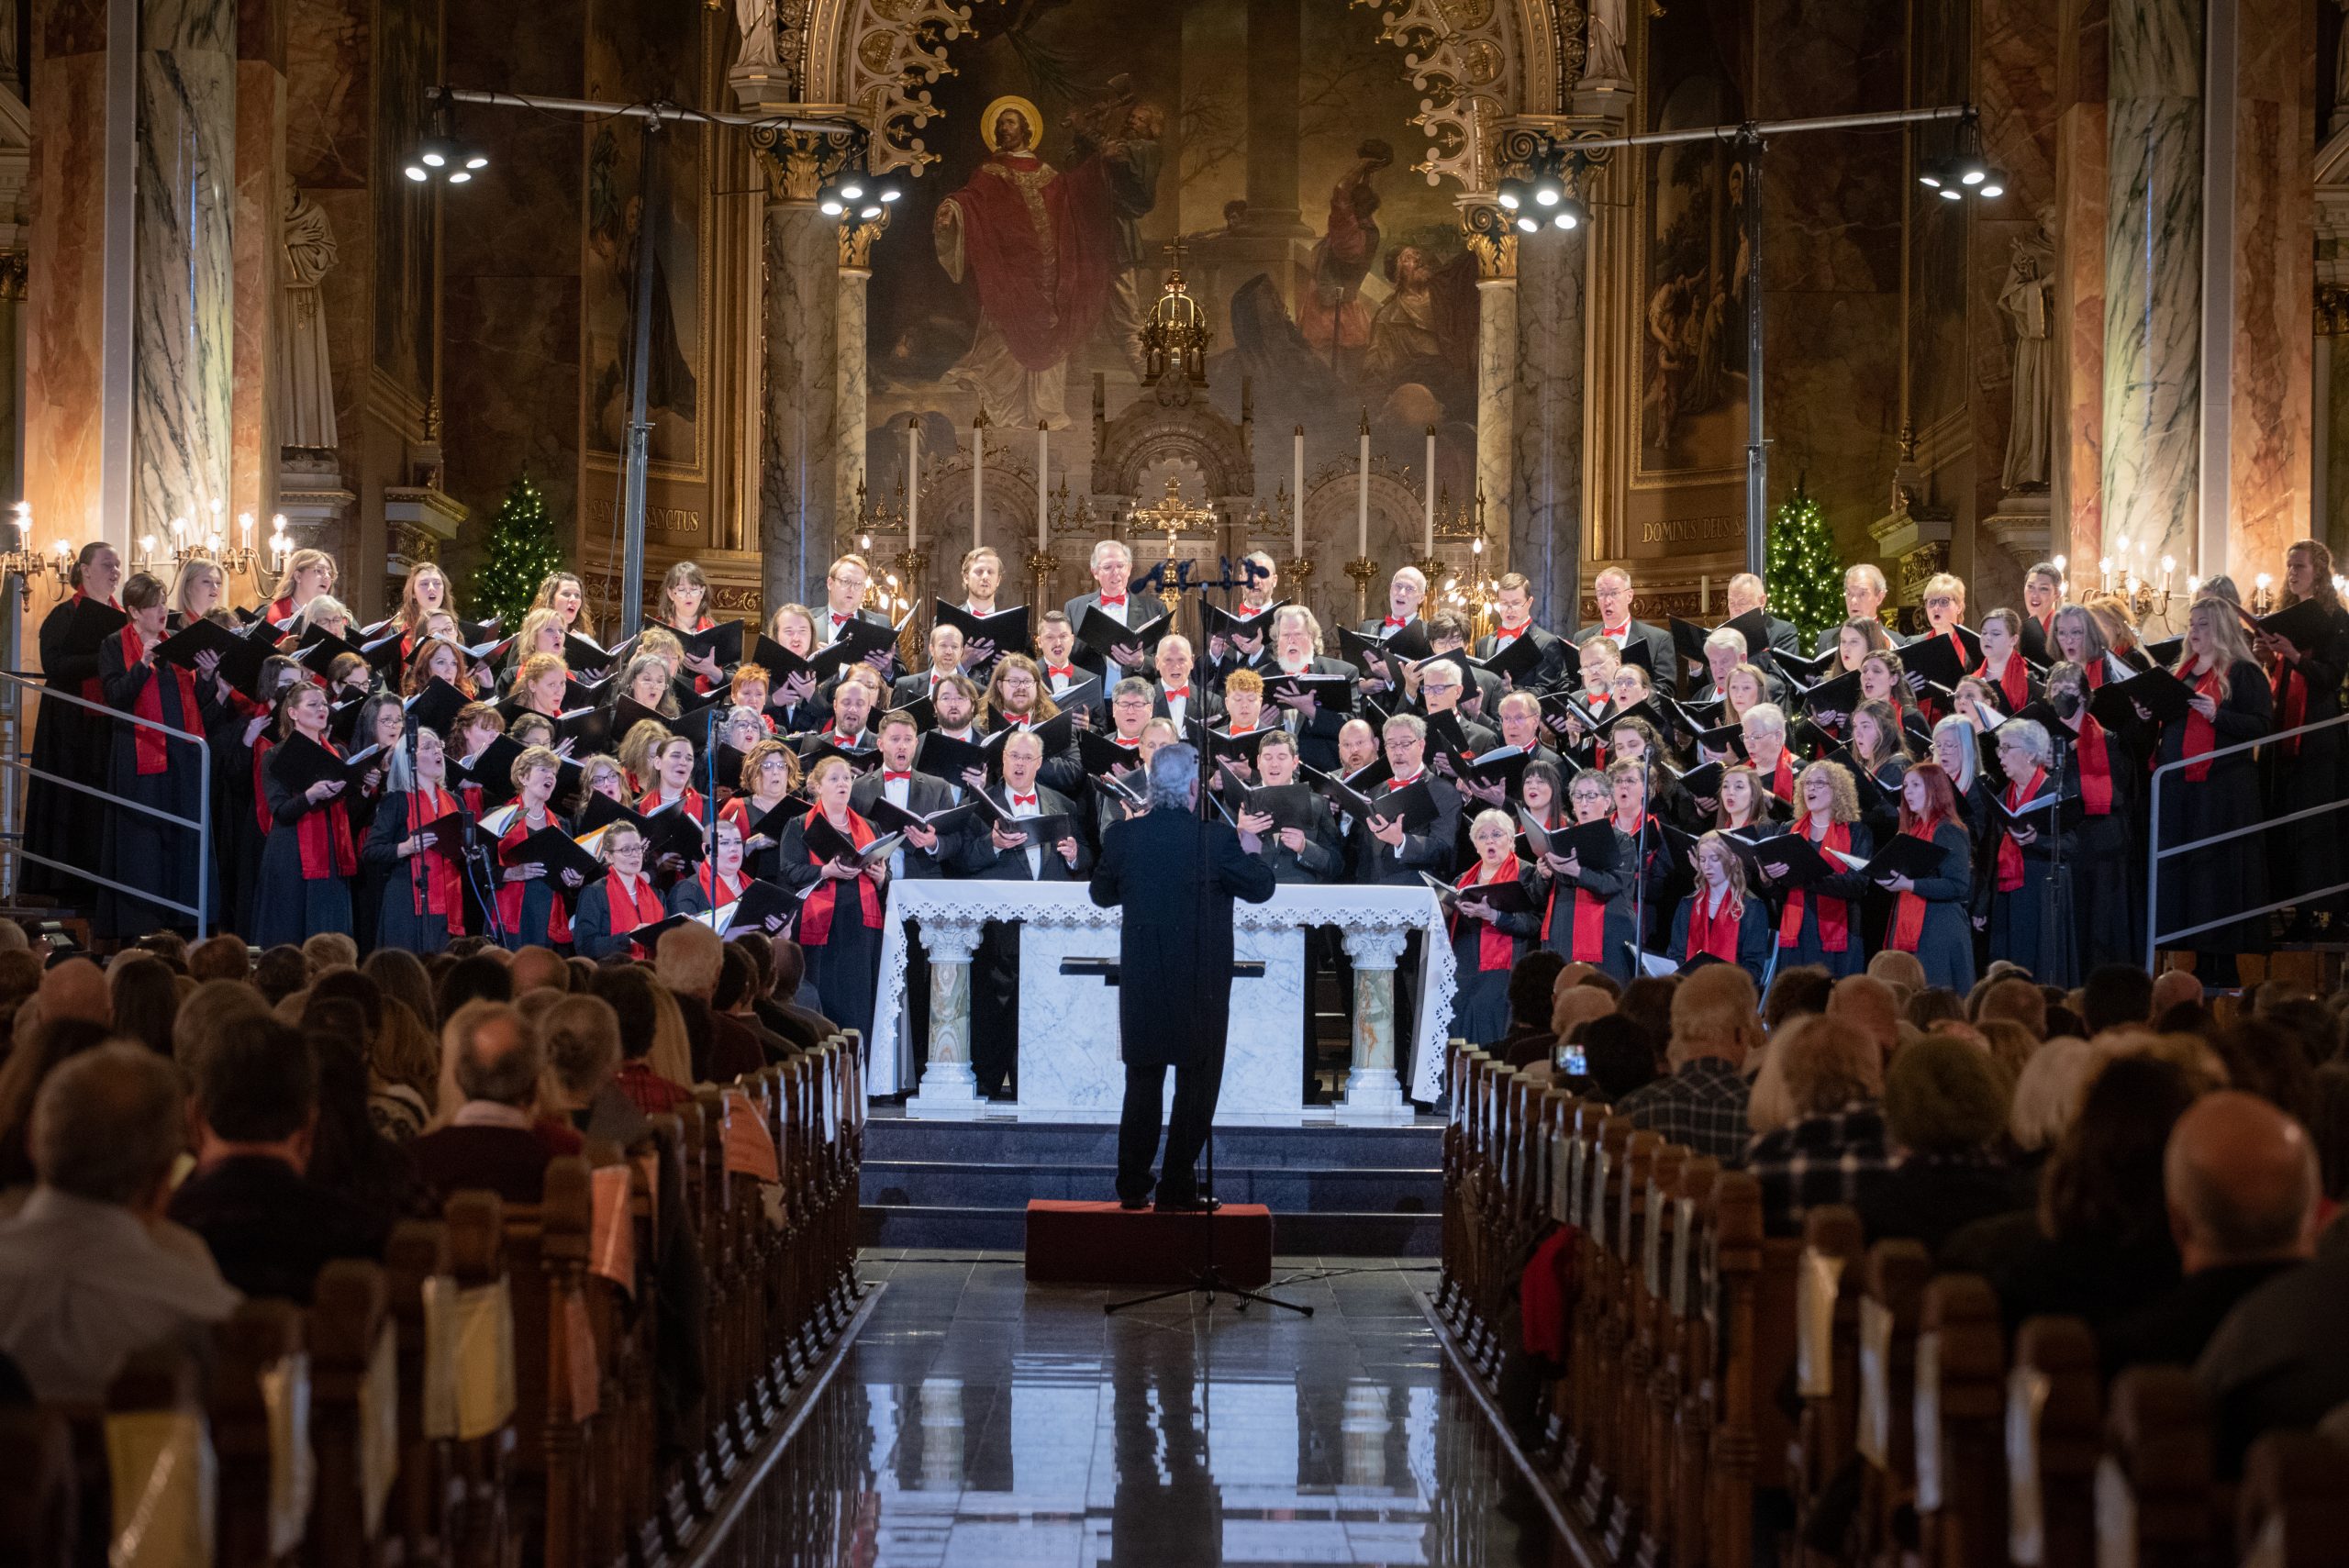 Bel Canto Chorus Presents “Christmas in the Basilica” – A Joyful Celebration of the Season, and the 15th and final holiday Basilica performance for Music Director Richard Hynson